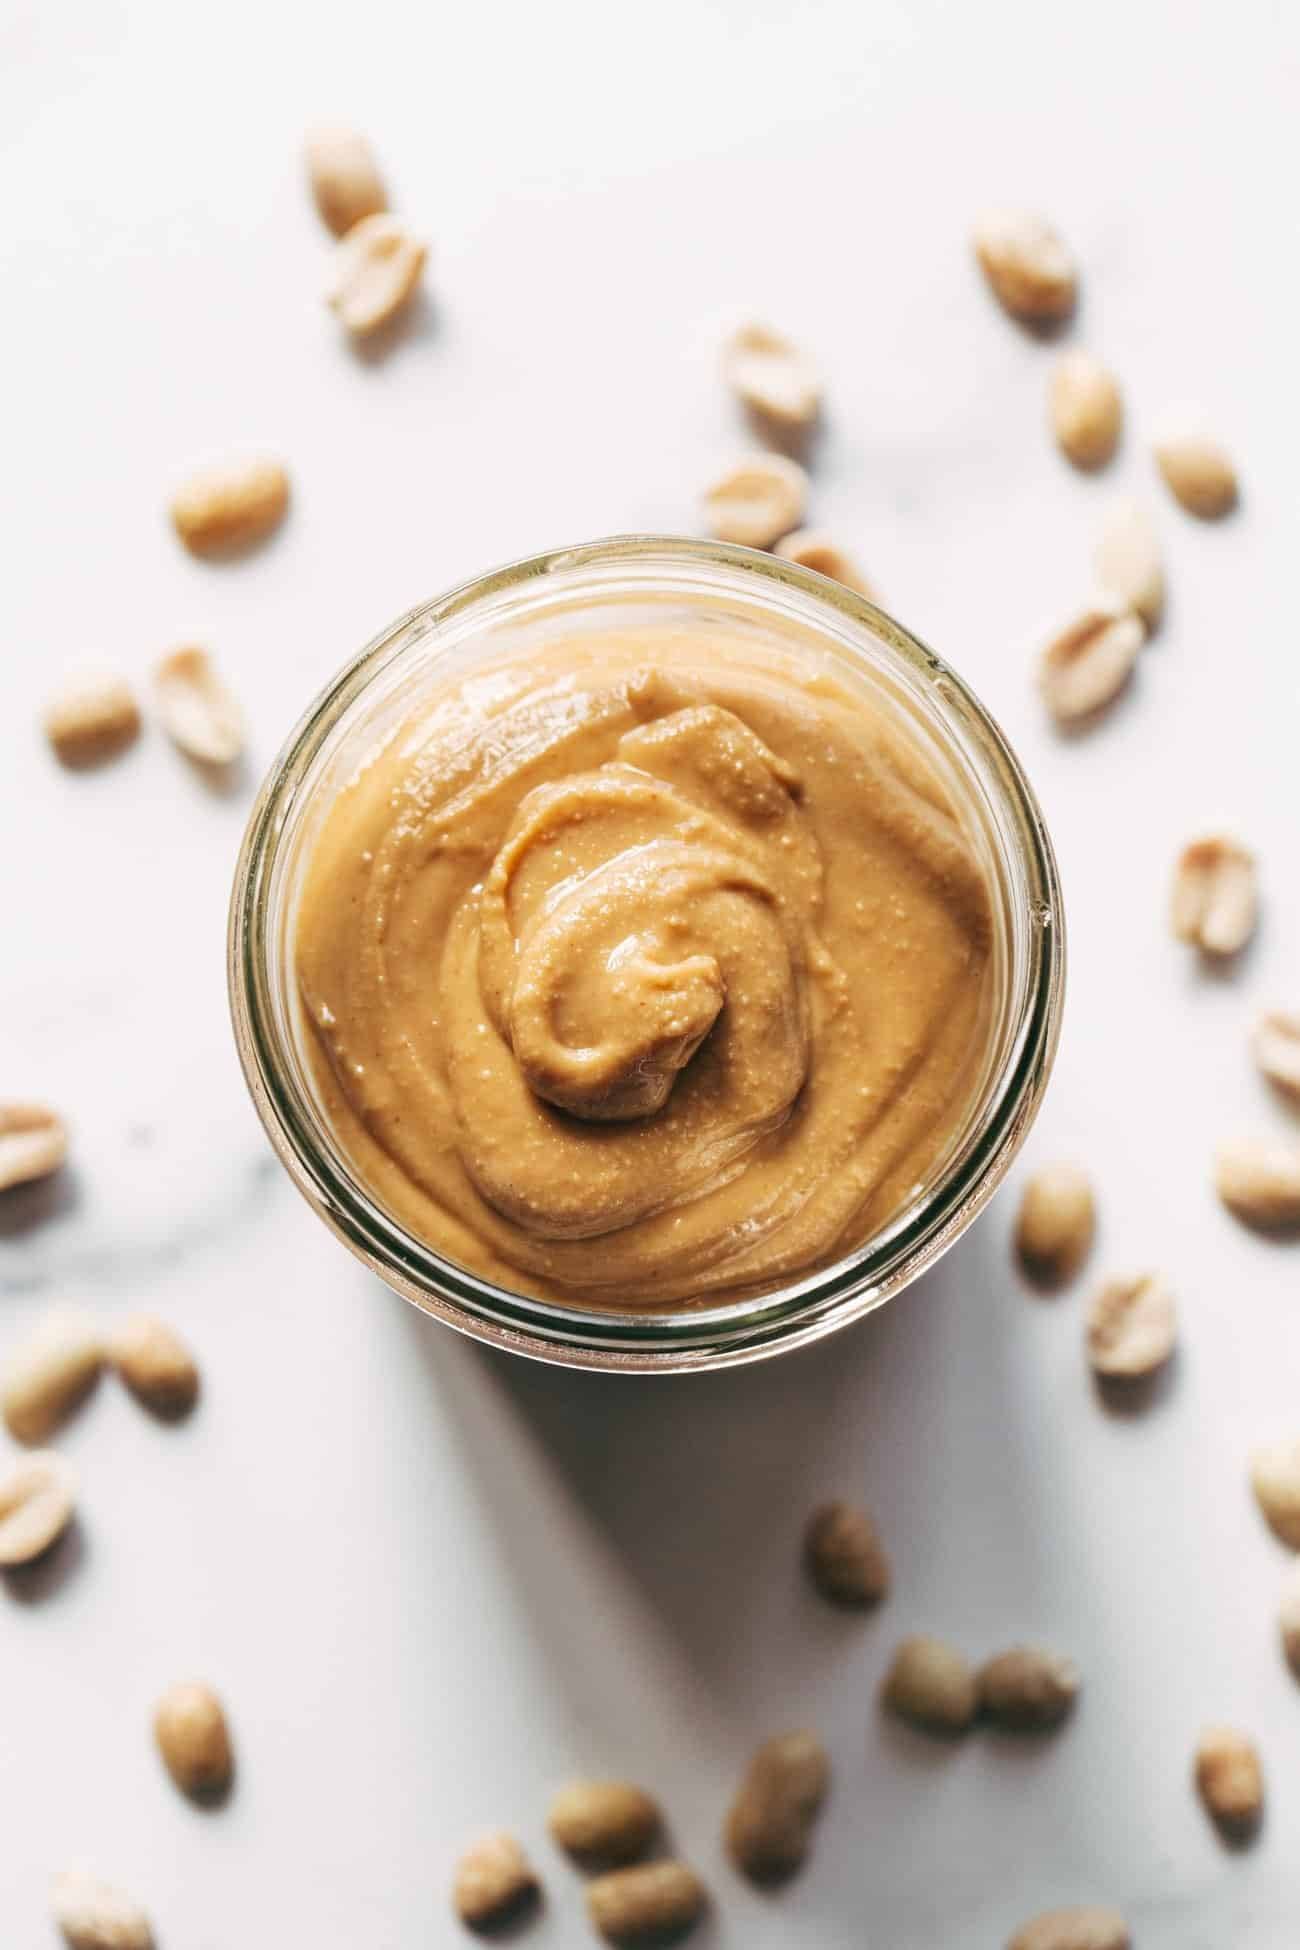 Homemade peanut butter in a jar surrounded with peanuts